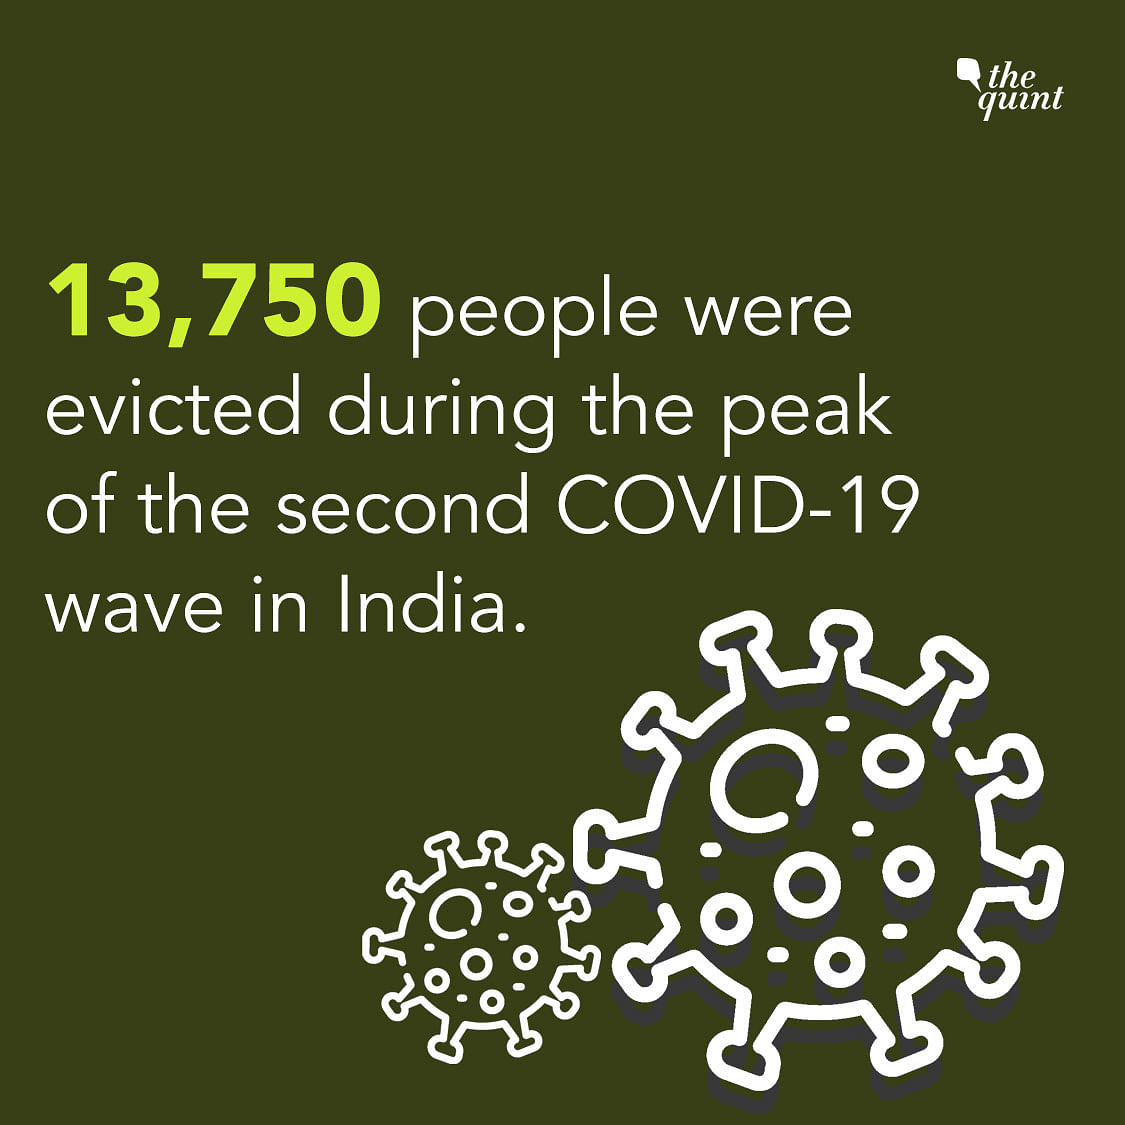 More than 250,000 people in the country were evicted from their homes in the pandemic months.